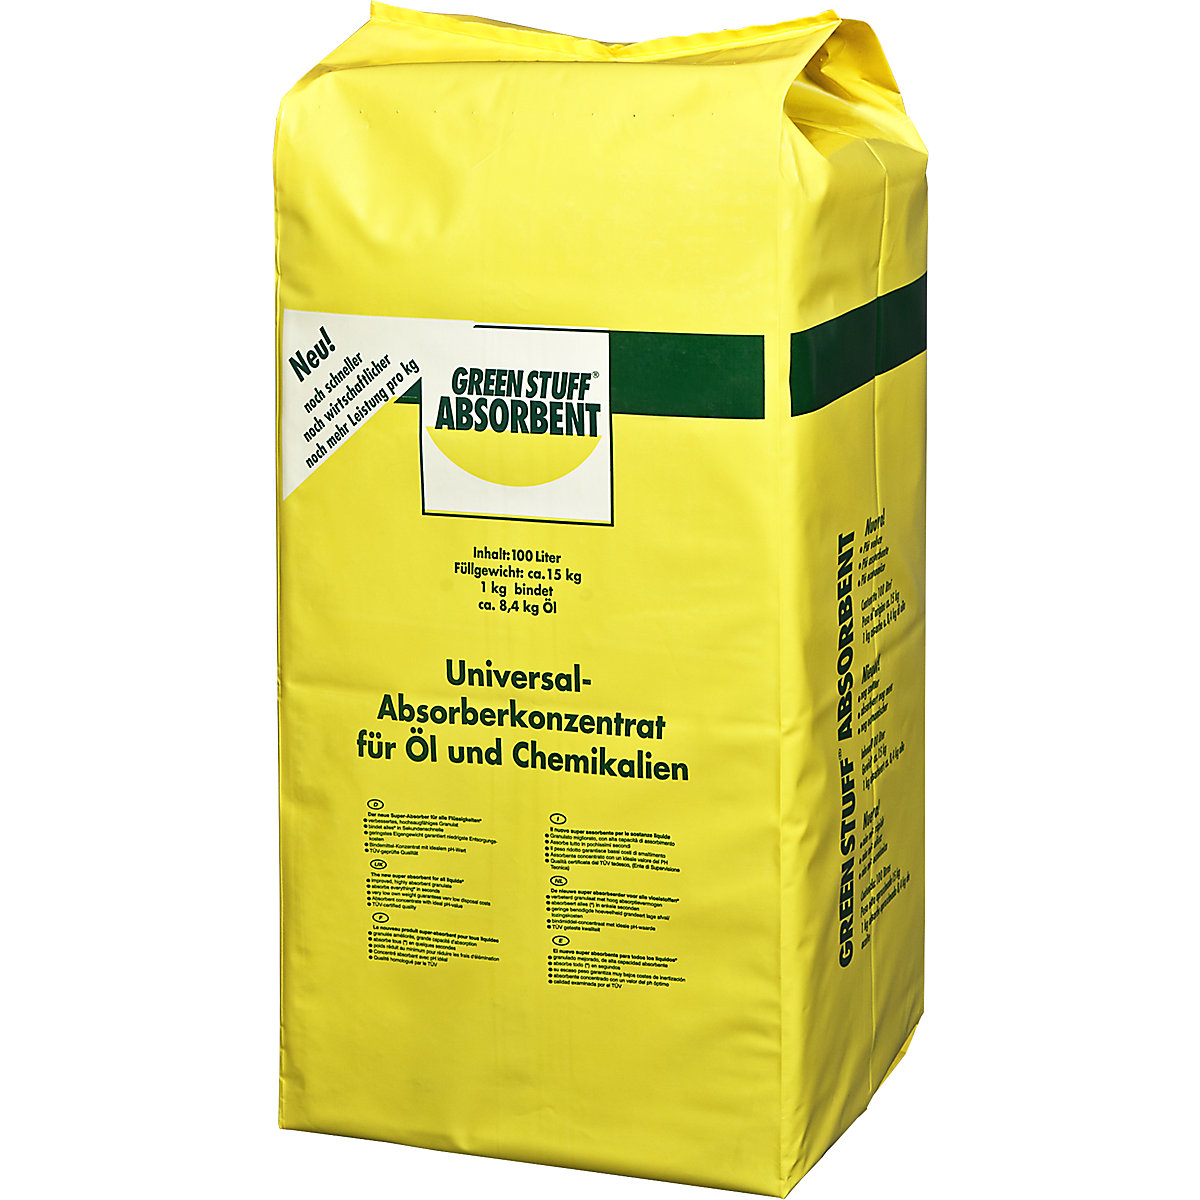 Universal absorbent concentrate